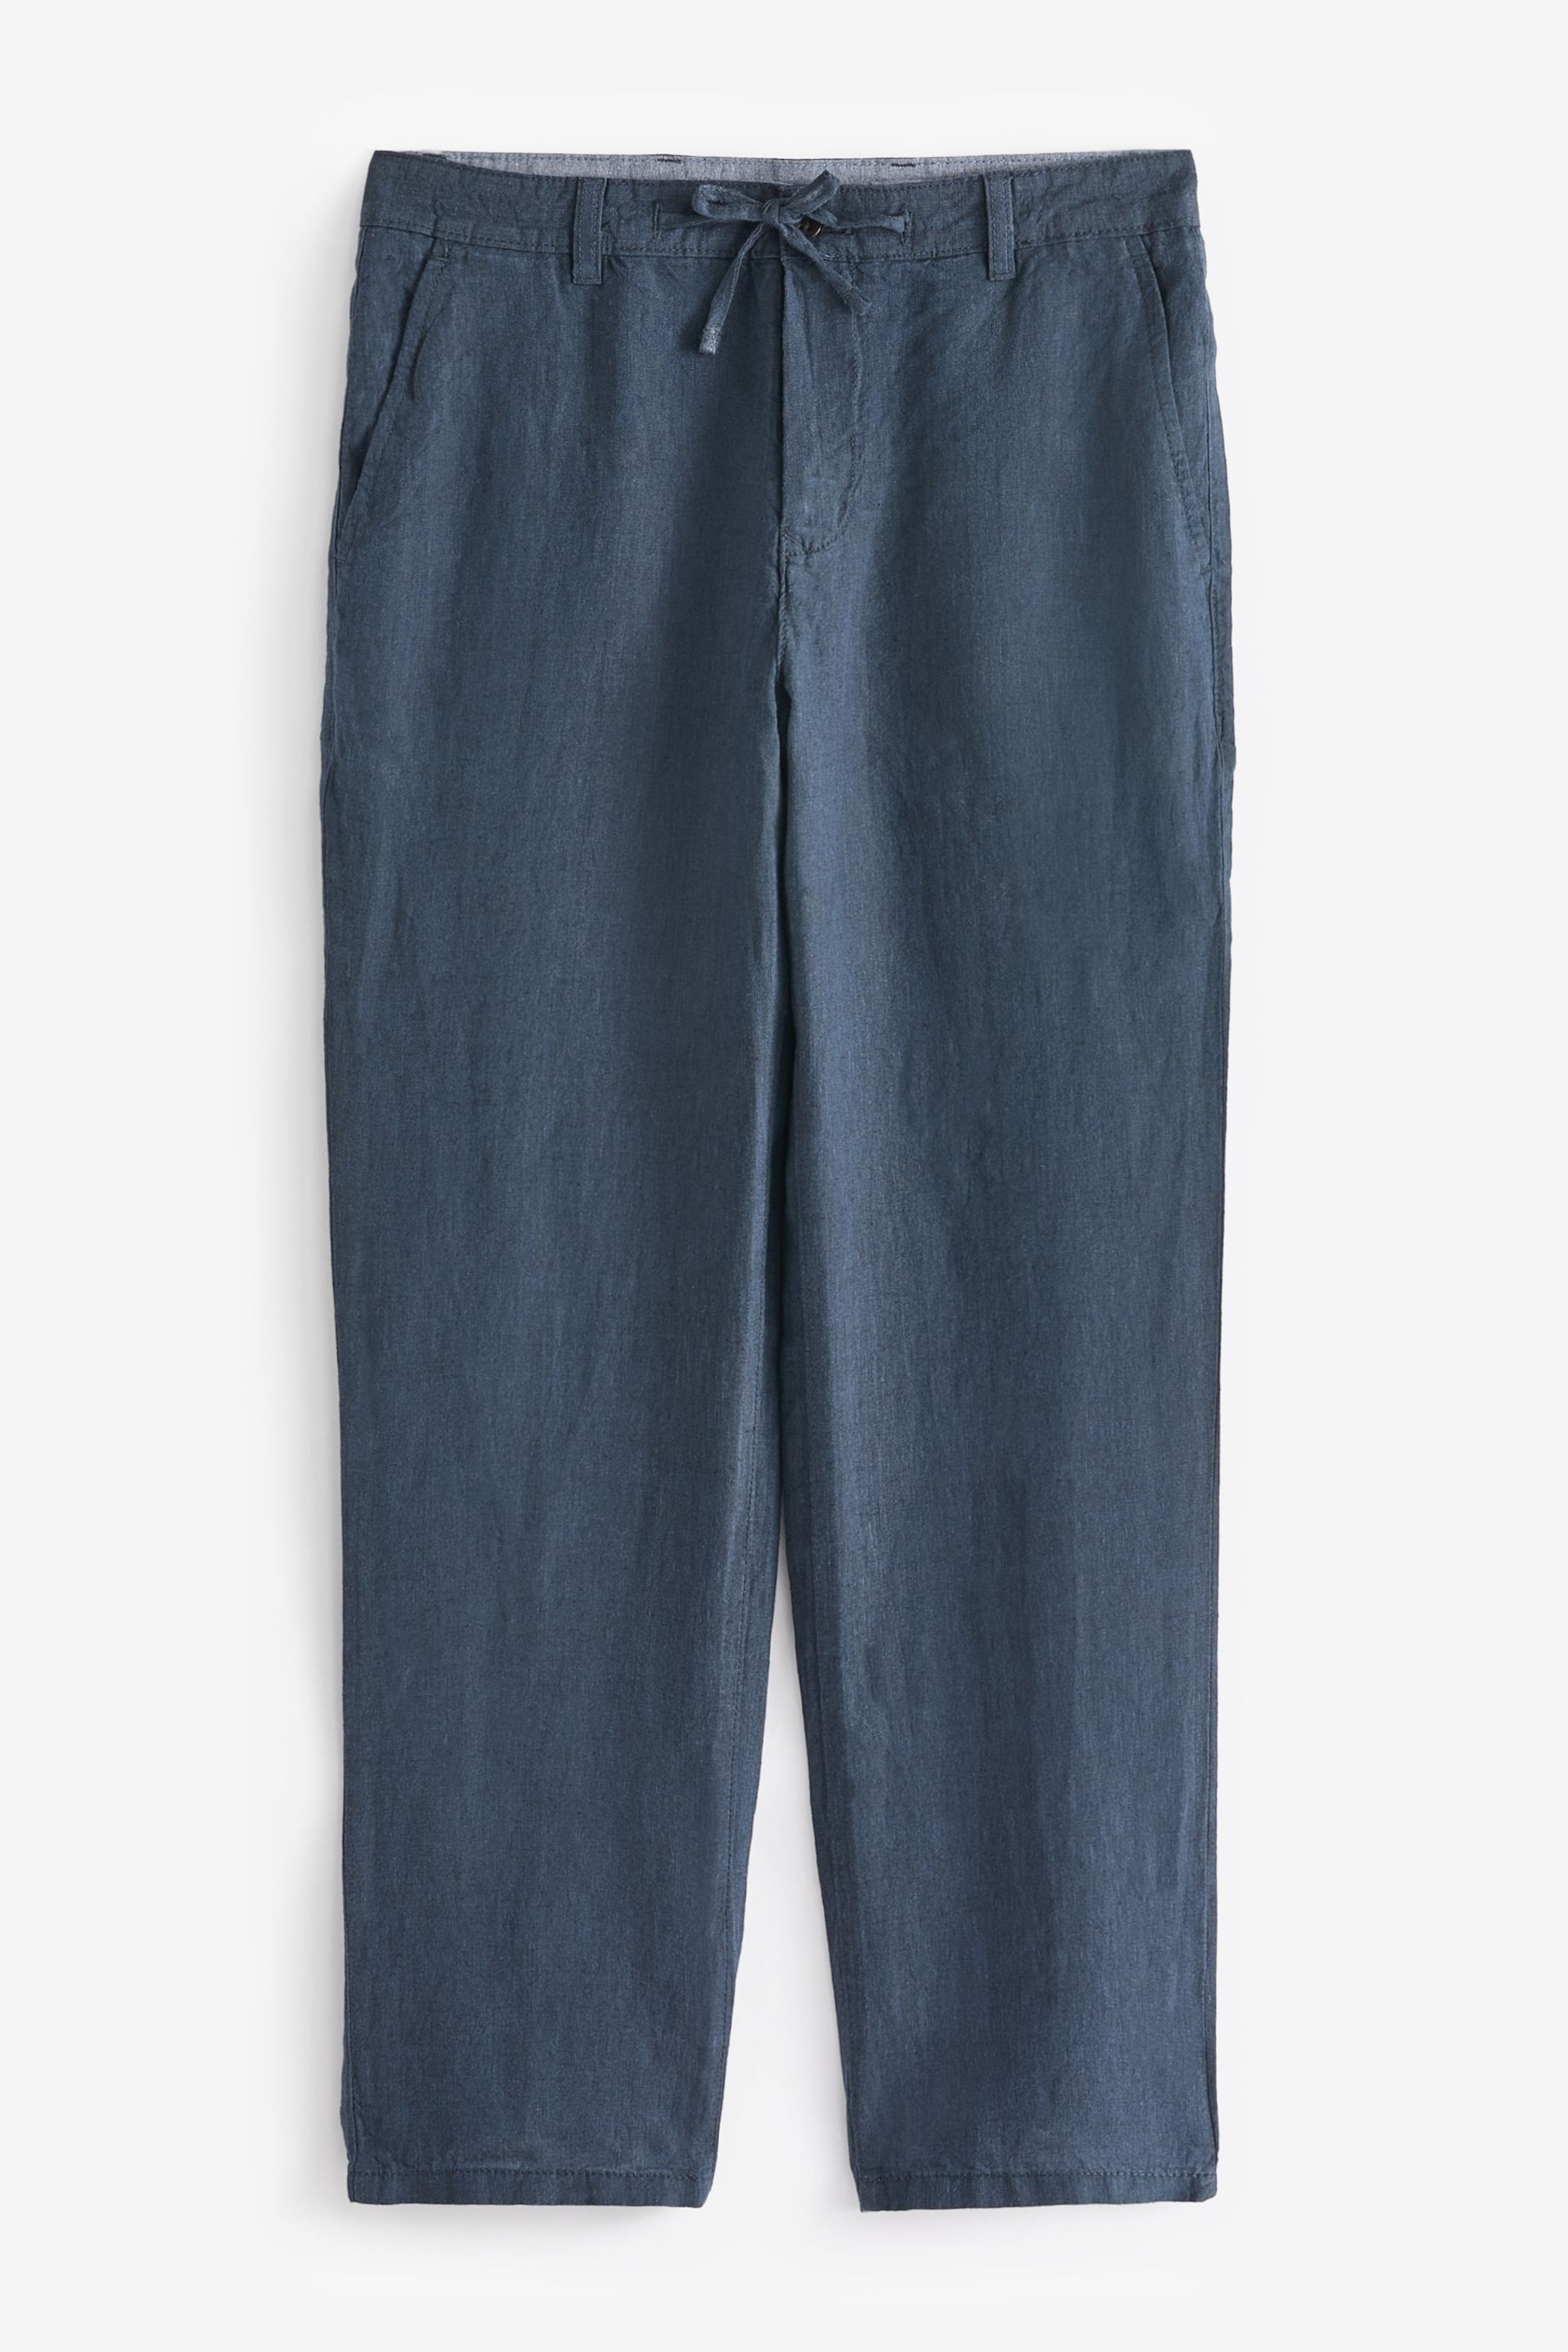 Navy Blue 100% Linen Drawstring Trousers - Image 7 of 8